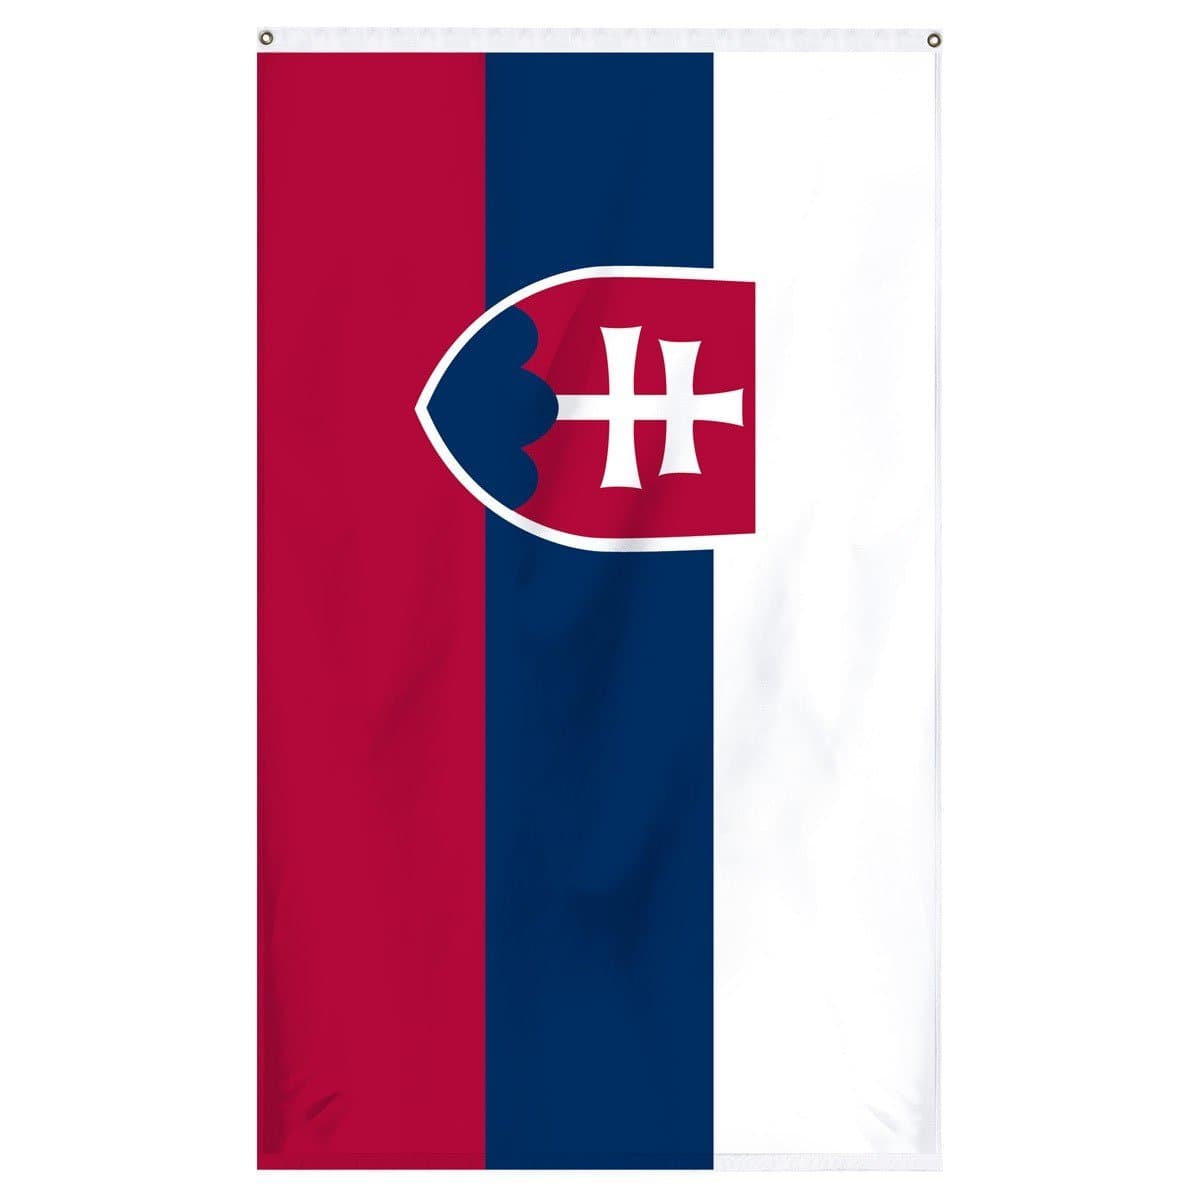 Slovakia National flag for sale to buy online from Atlantic Flag and Pole